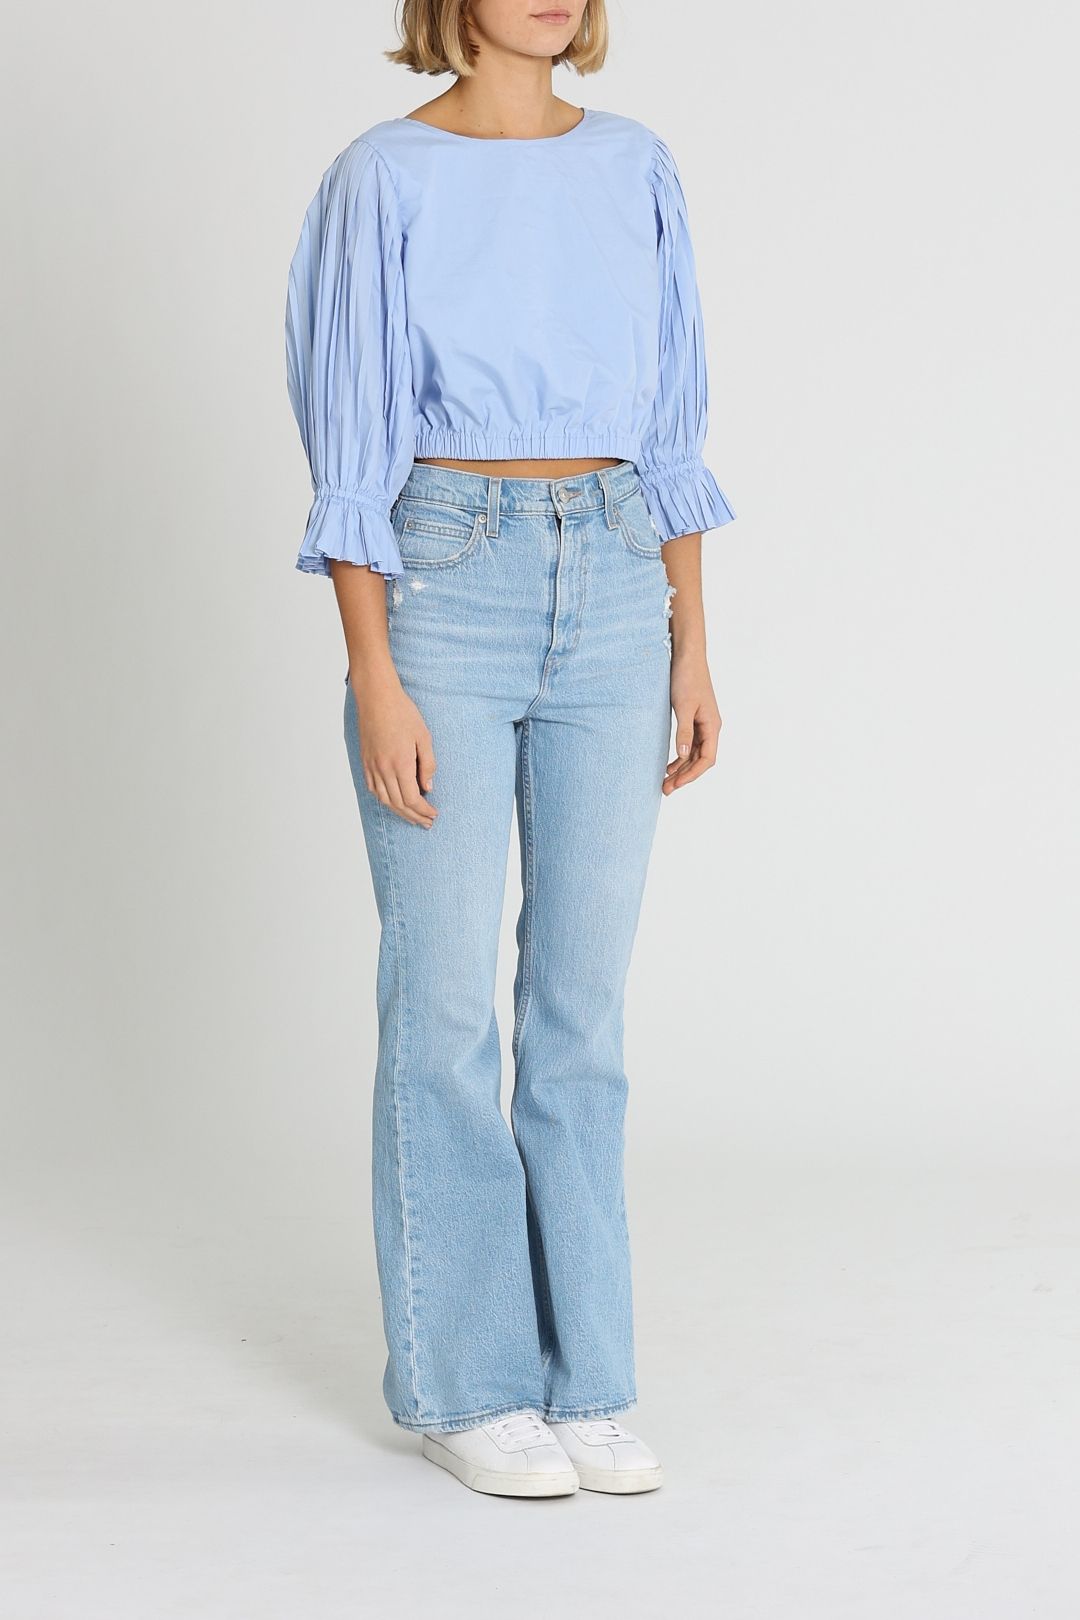 Sovere Focus Pleat Blouse Cropped